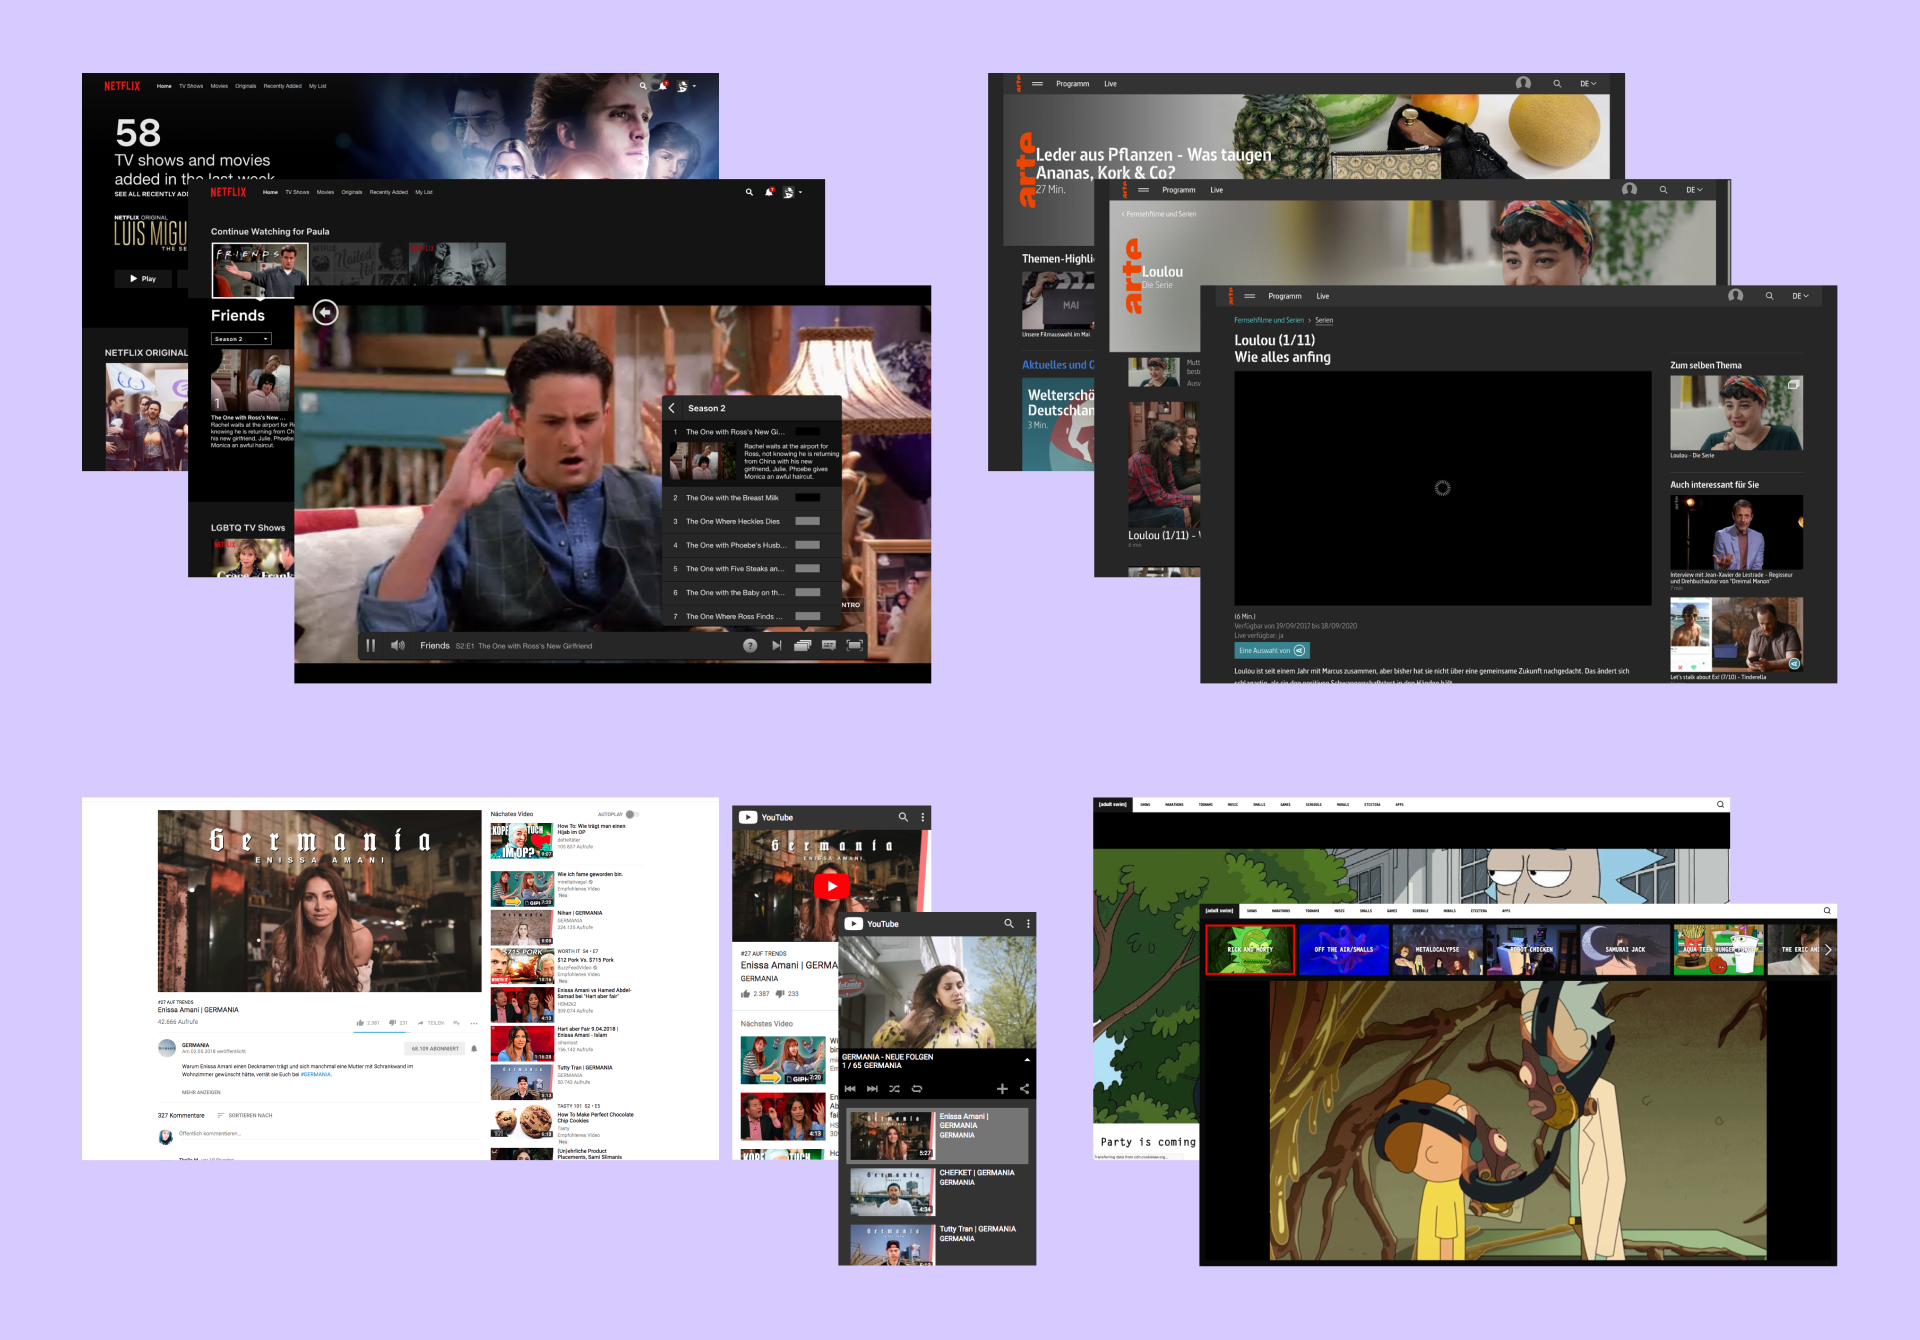 Some of the video streaming platforms with relevant interaction design, consistent look & feel or a similar audiences: Netflix, arte, YouTube, AdultSwim